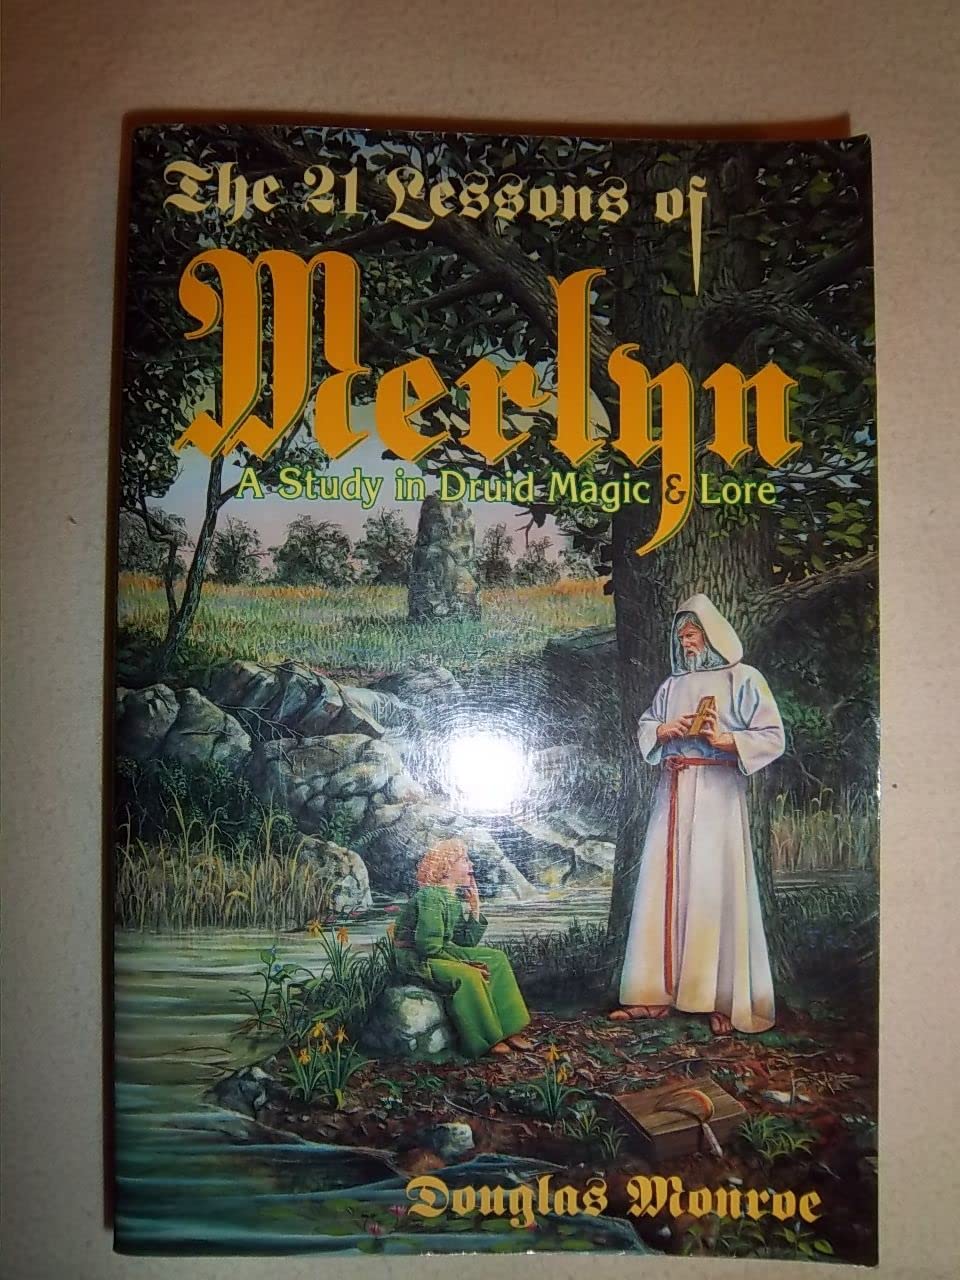 The 21 Lessons of Merlyn: A Study in Druid Magic & Lore